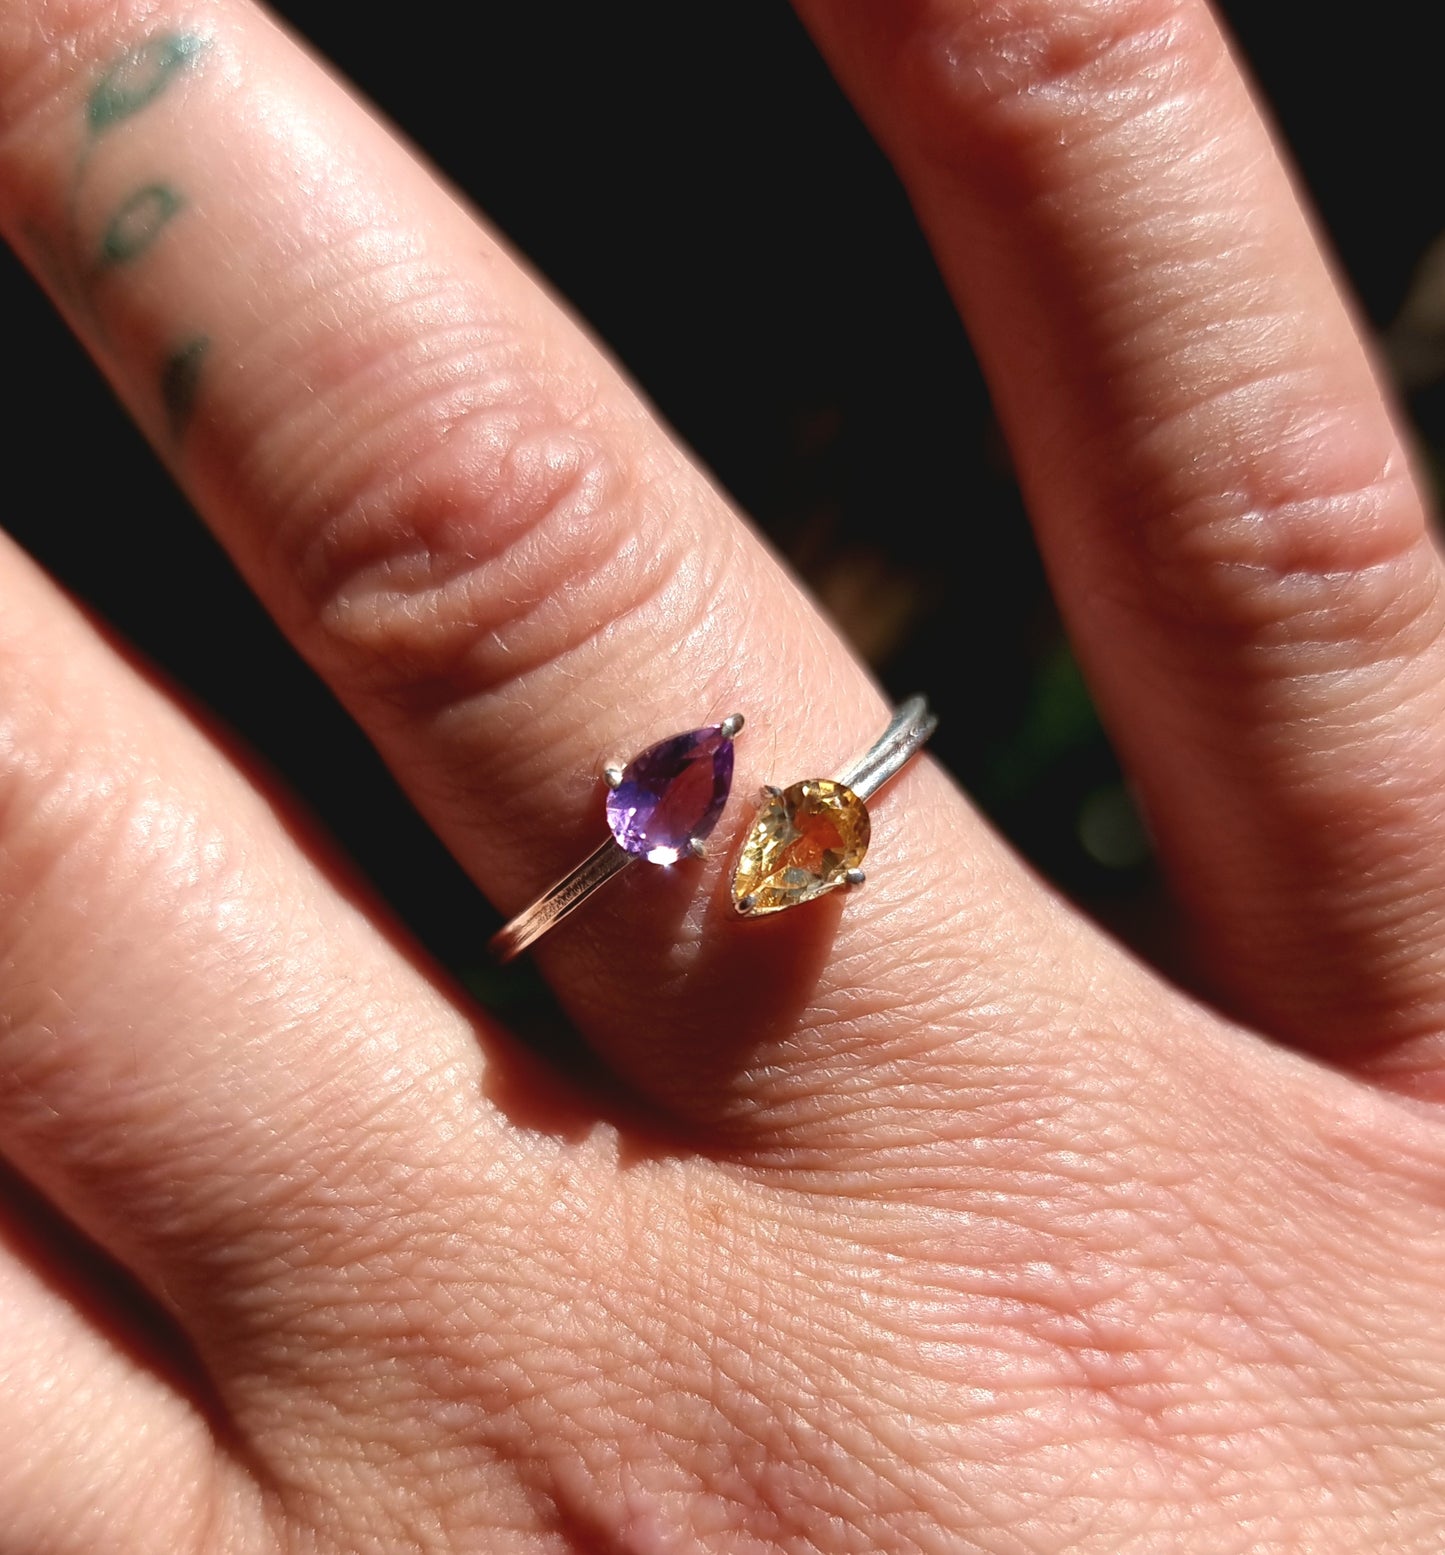 AMETHYST & CITRINE 925 SILVER RING SIZE 8 - INTUITION & WEALTH